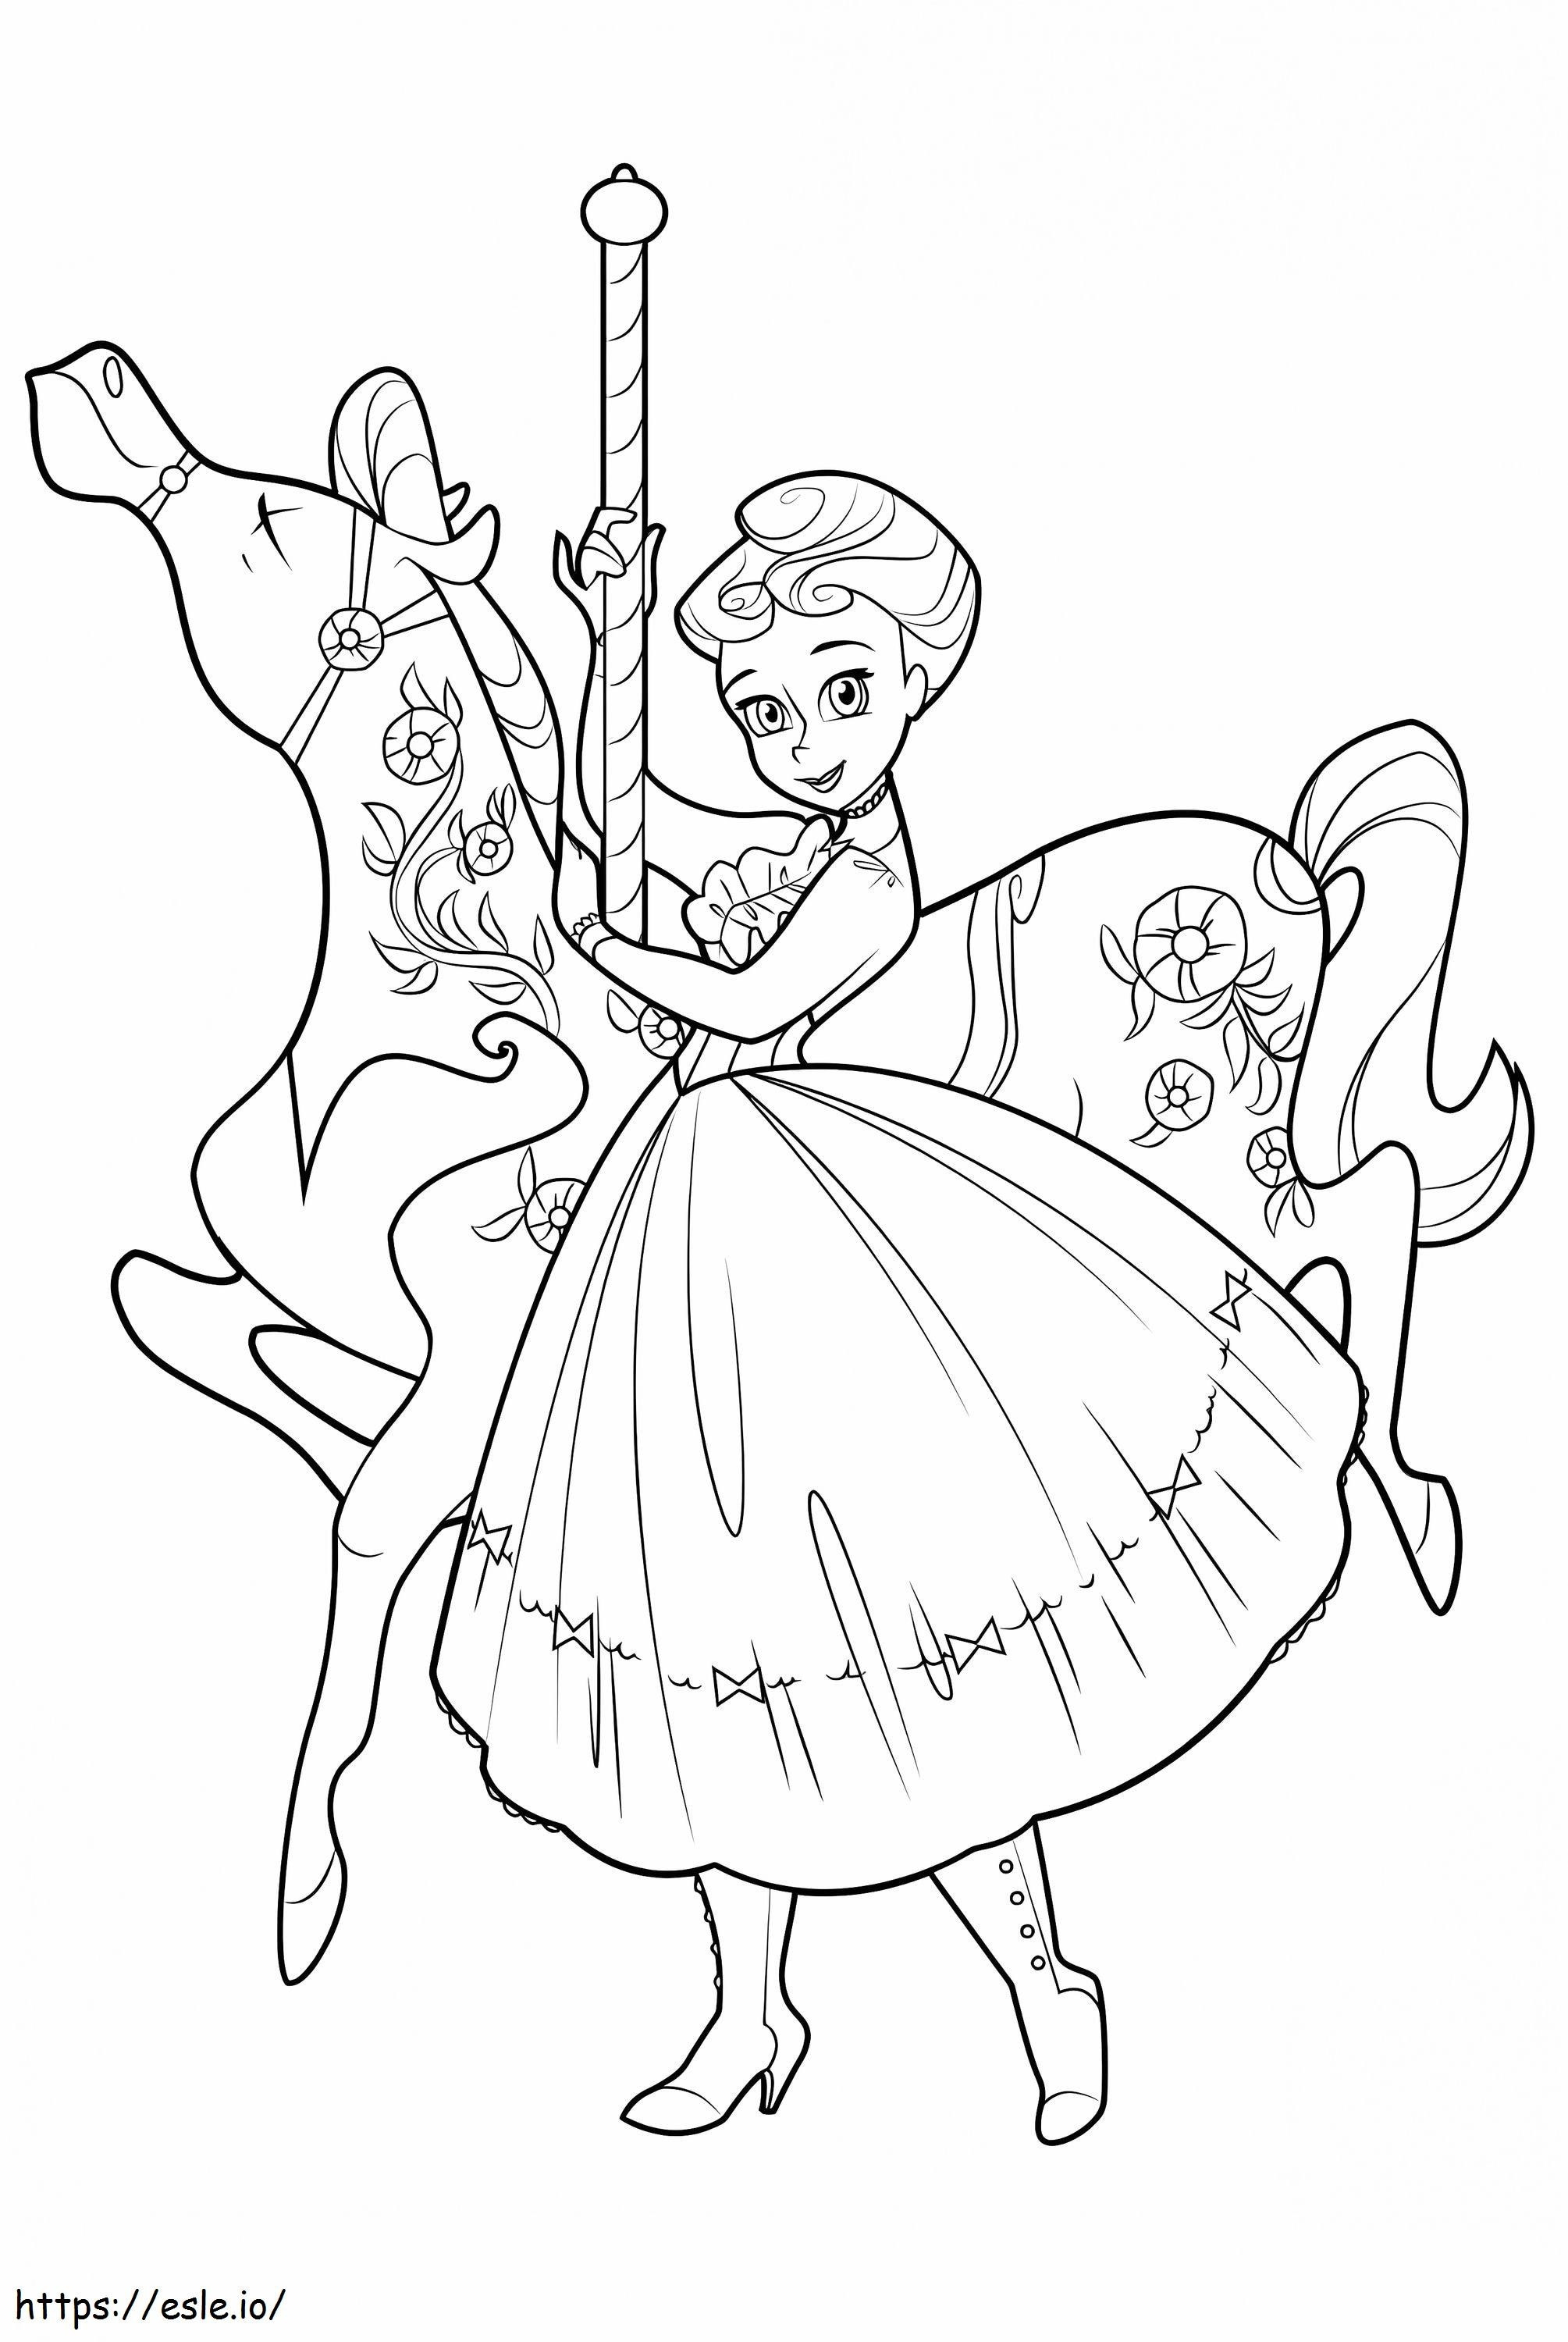 Little Mary Poppins coloring page